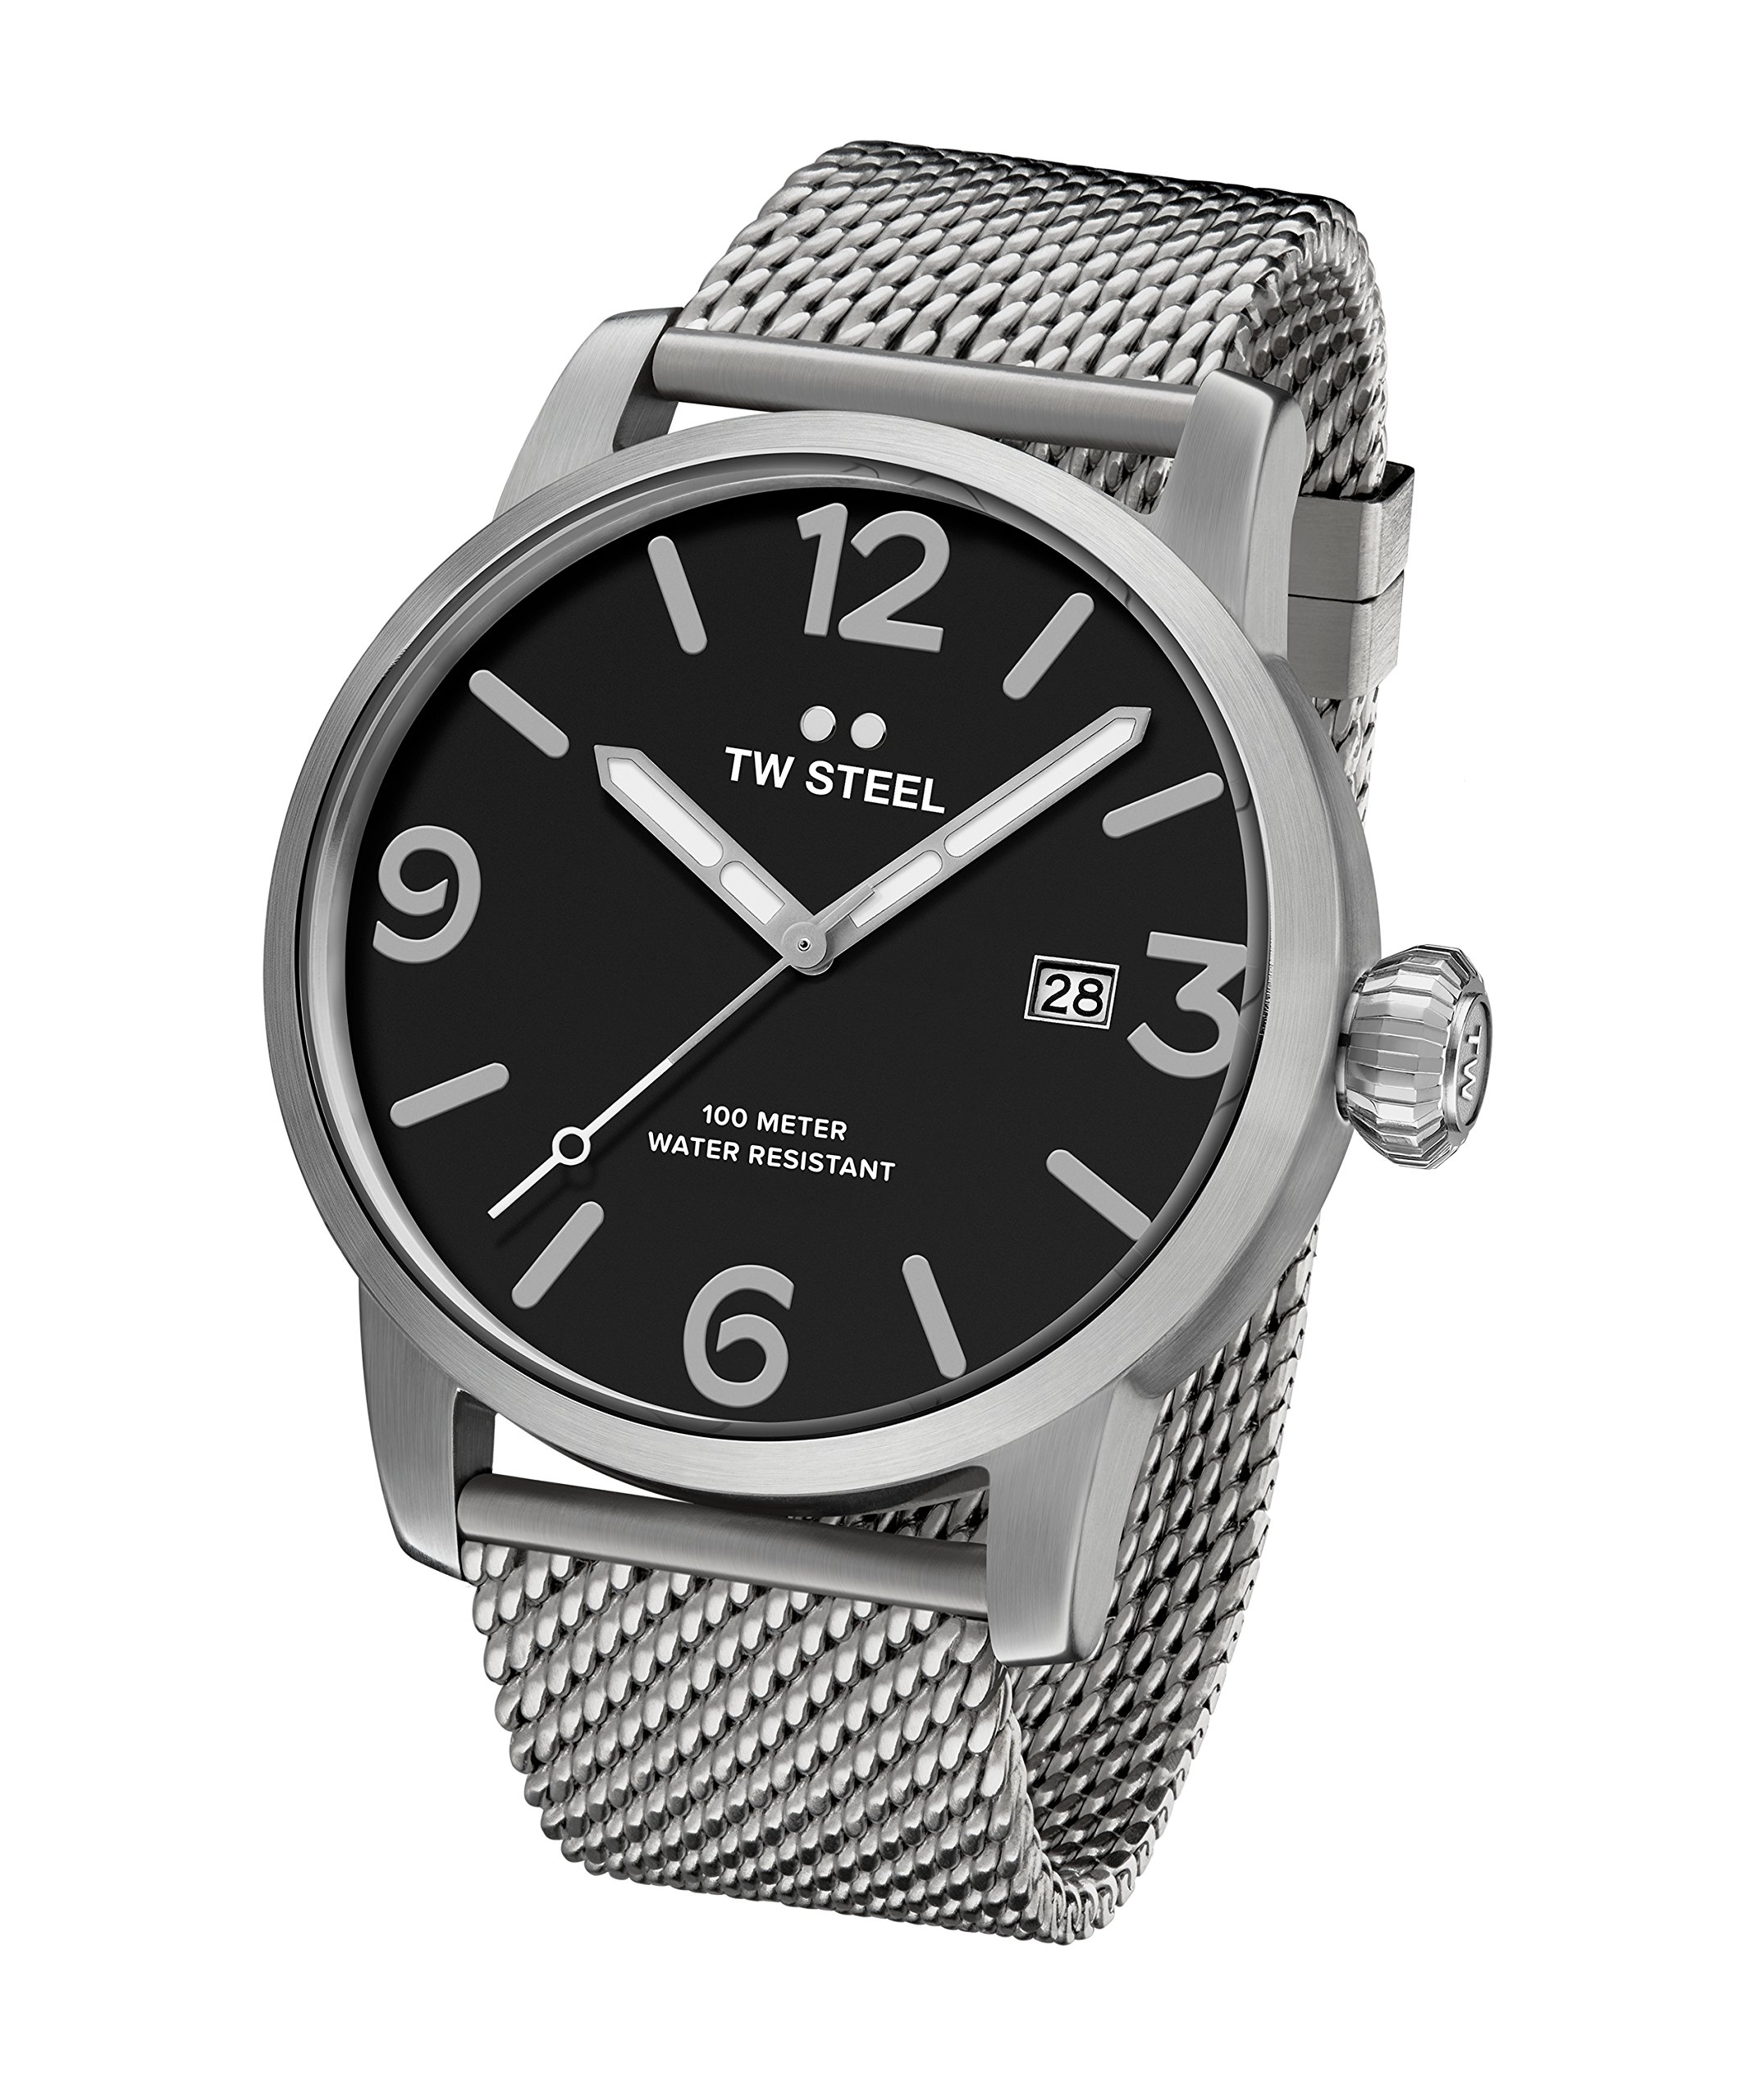 TW Steel Maverick Unisex Quartz Watch with Black Dial Analogue Display and Grey Stainless Steel Bracelet